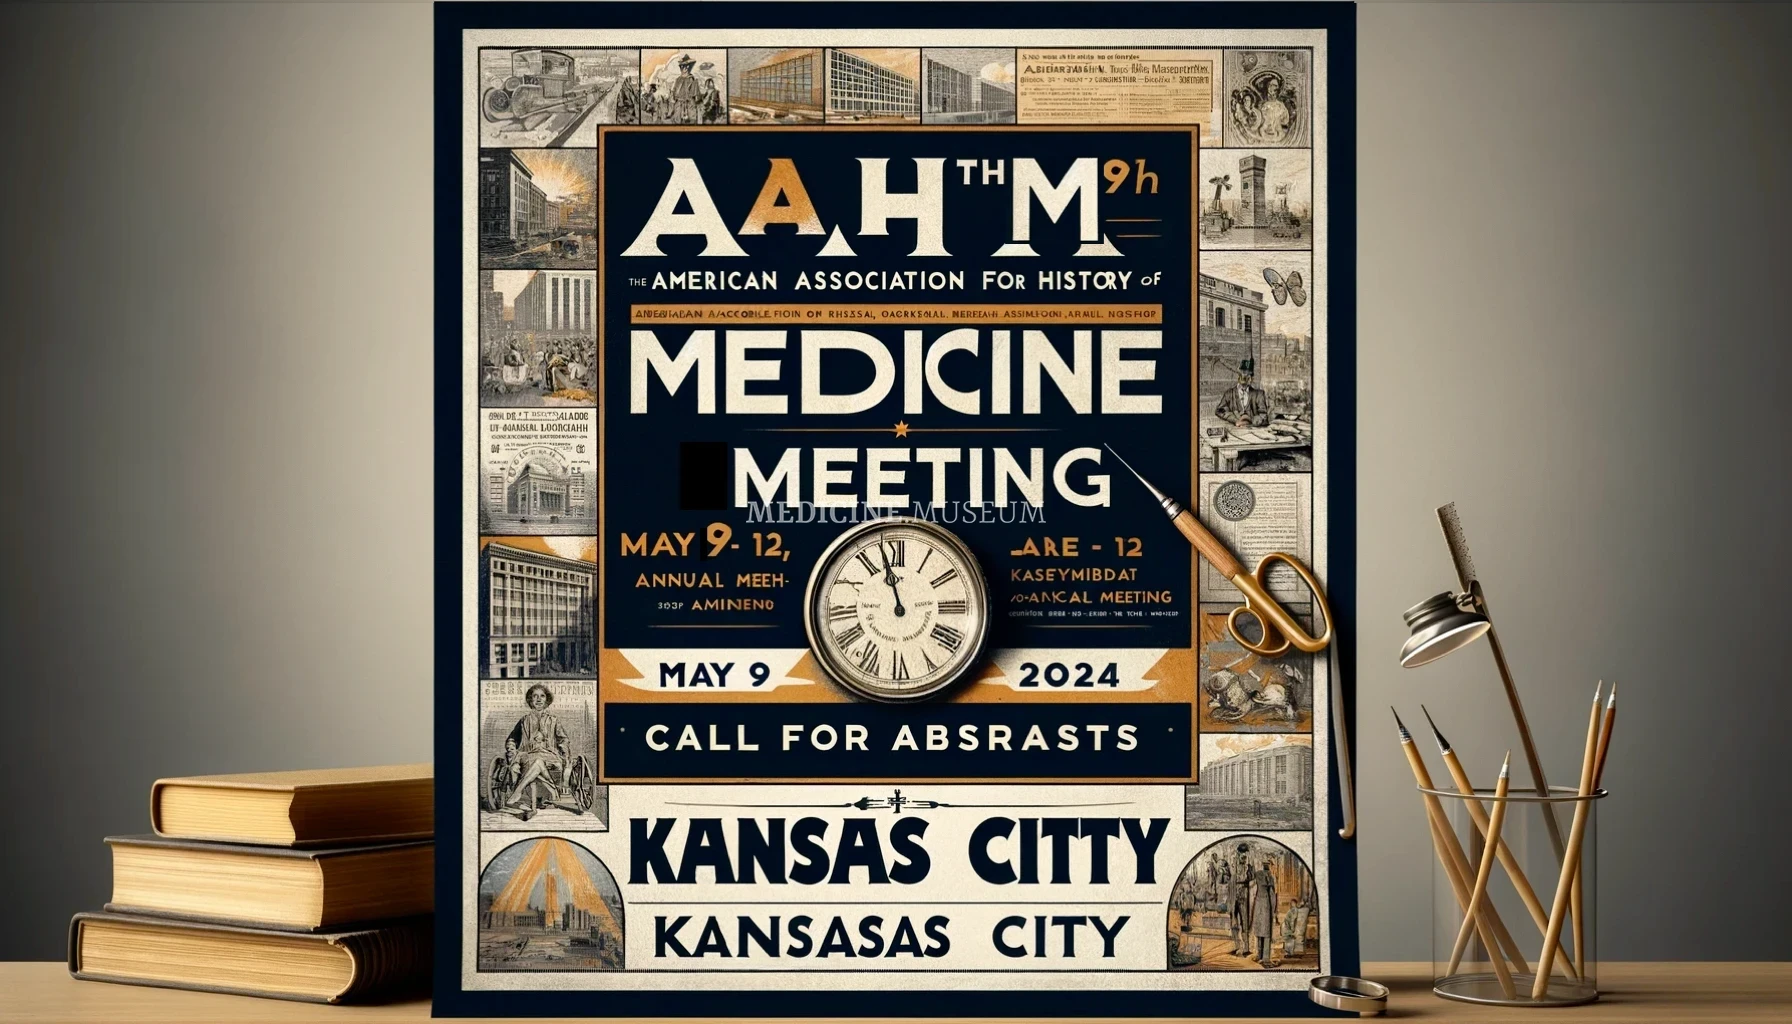 American Association for the History of Medicine holds 97th annual meeting on May 9-12 2024 in Kansas